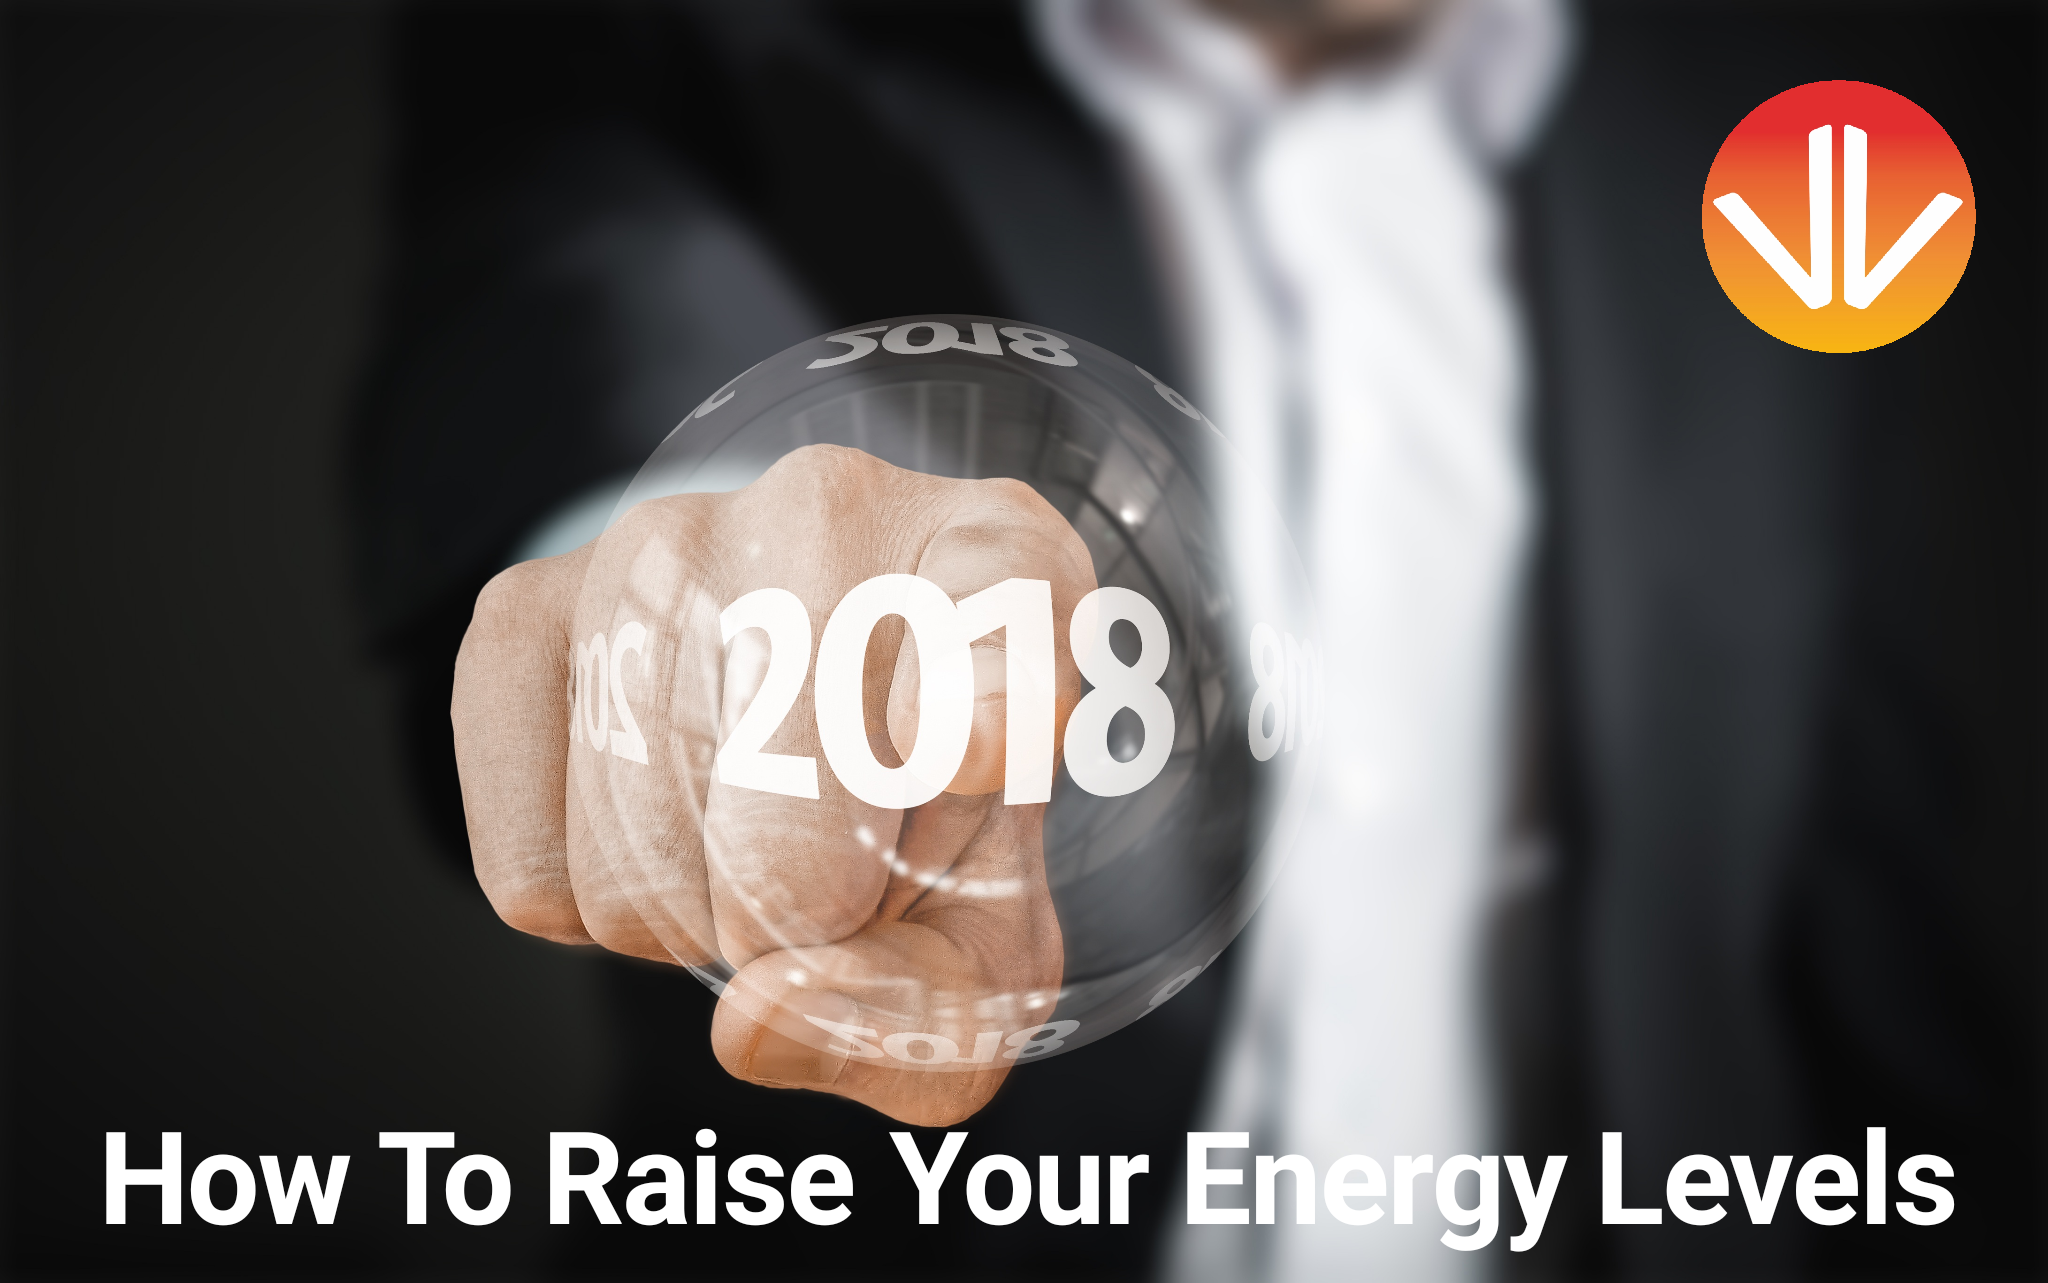 How To Raise Your Energy Levels